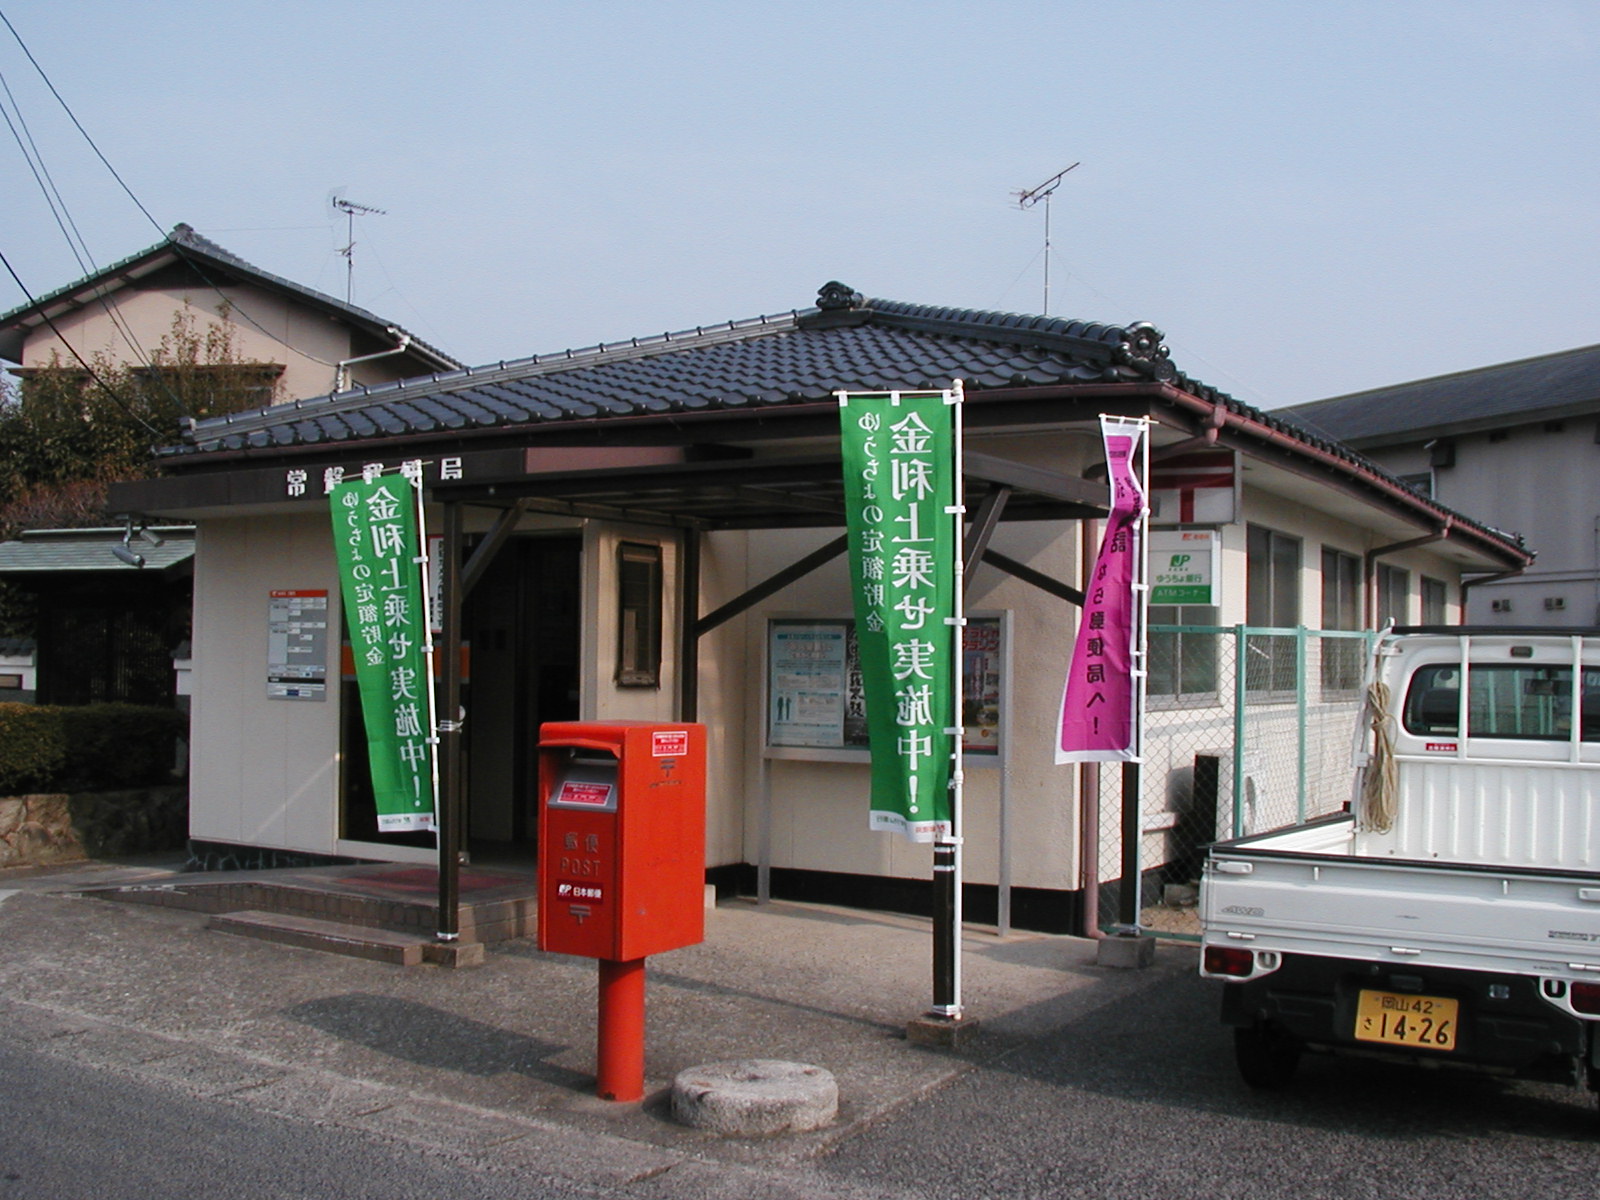 post office. Tokiwa 829m until the post office (post office)